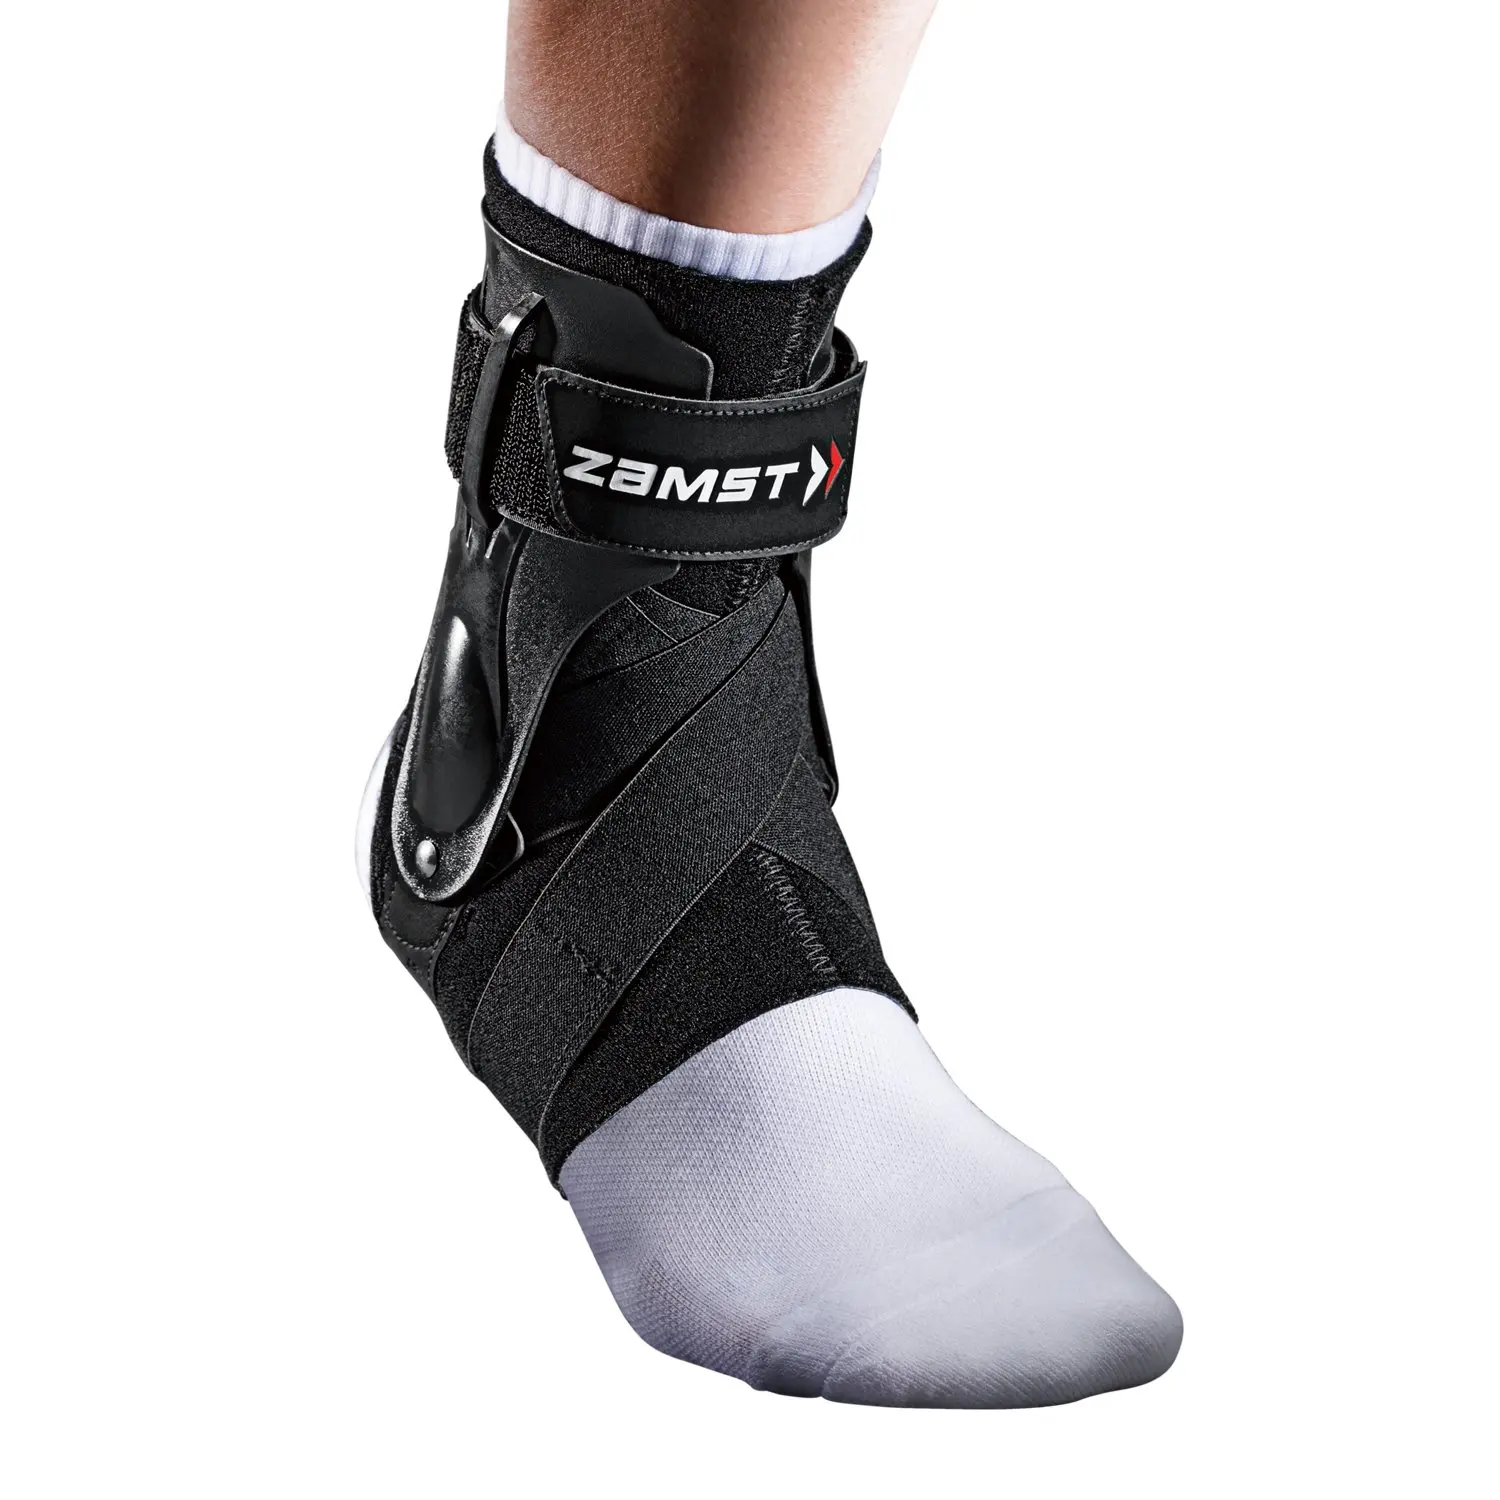 

Zamst Japan Original A2-DX Sports Ankle Brace with Protective Guards For High Ankle Sprains and Chronic Ankle Instability